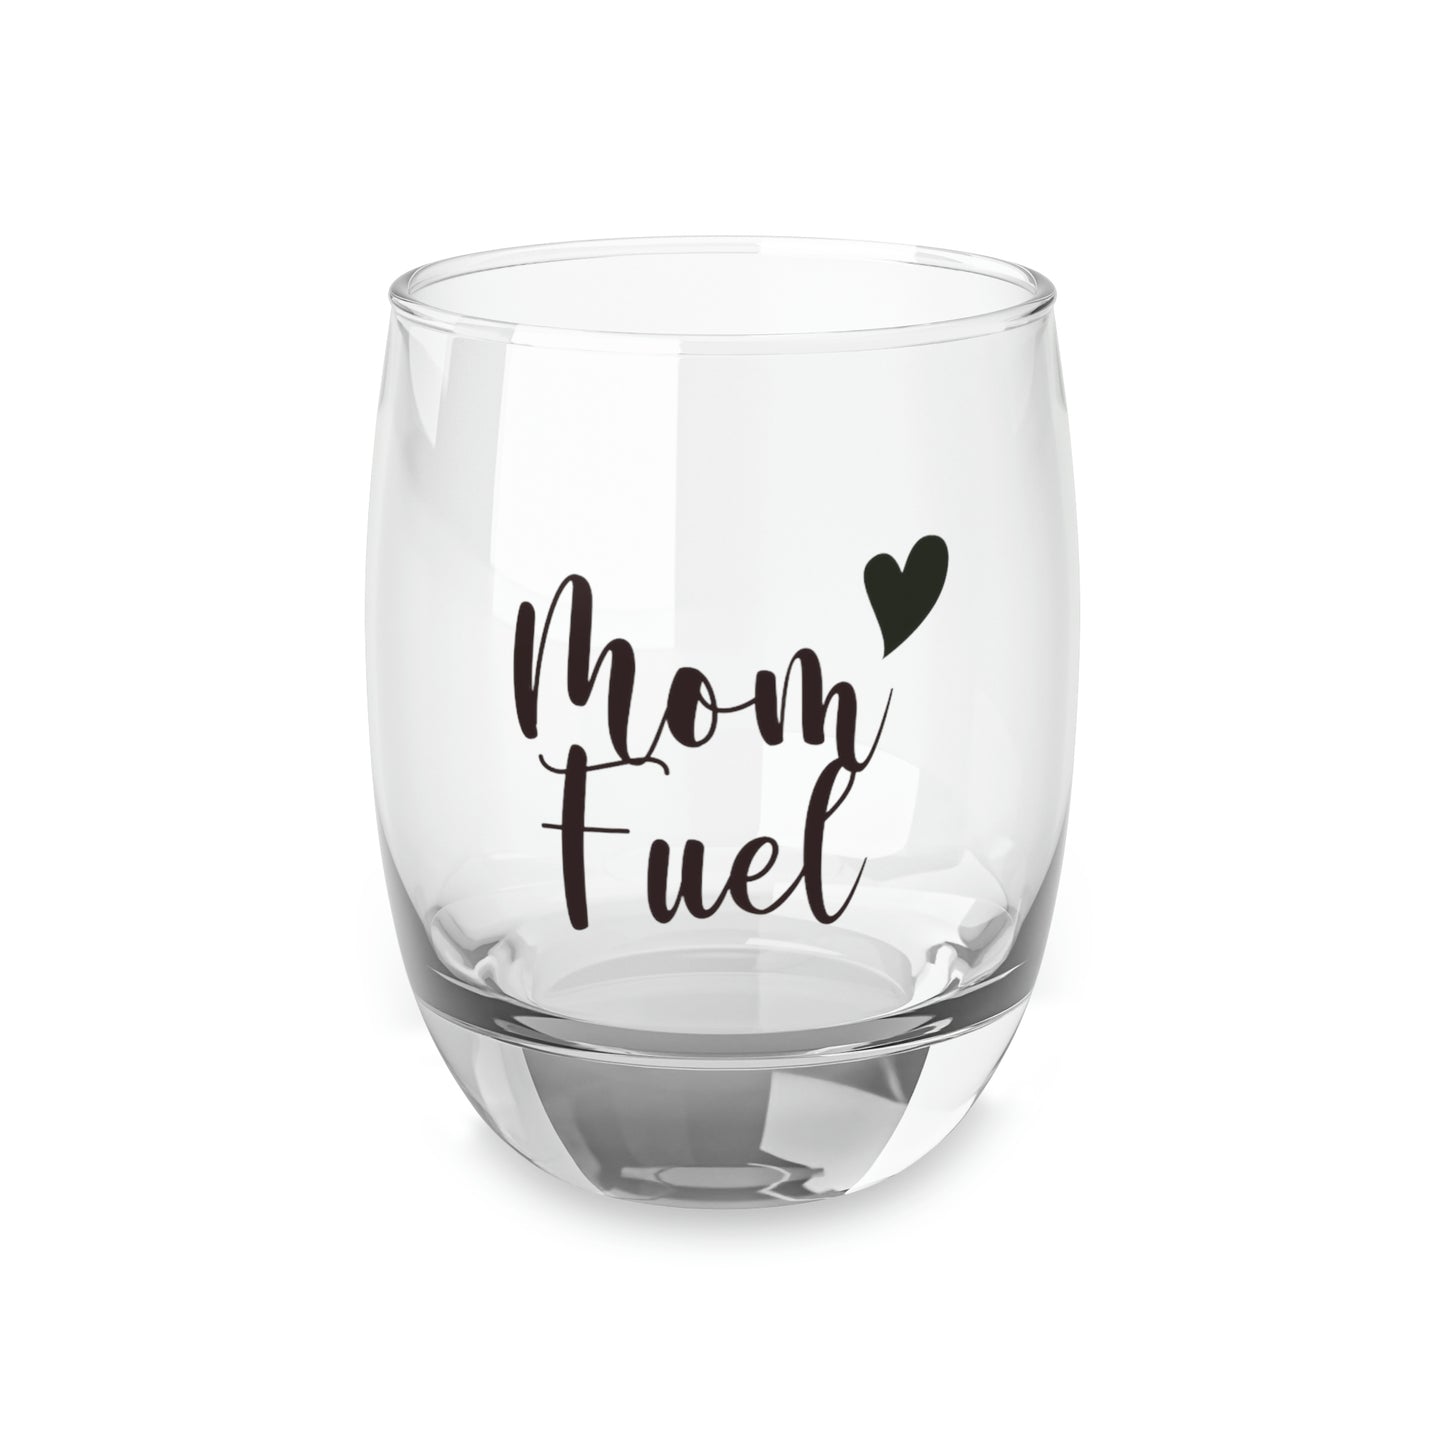 Shop MOM's Energy Glass: Perfect Mother's Day Gift - Mug Goodlifebean Giant Plushies